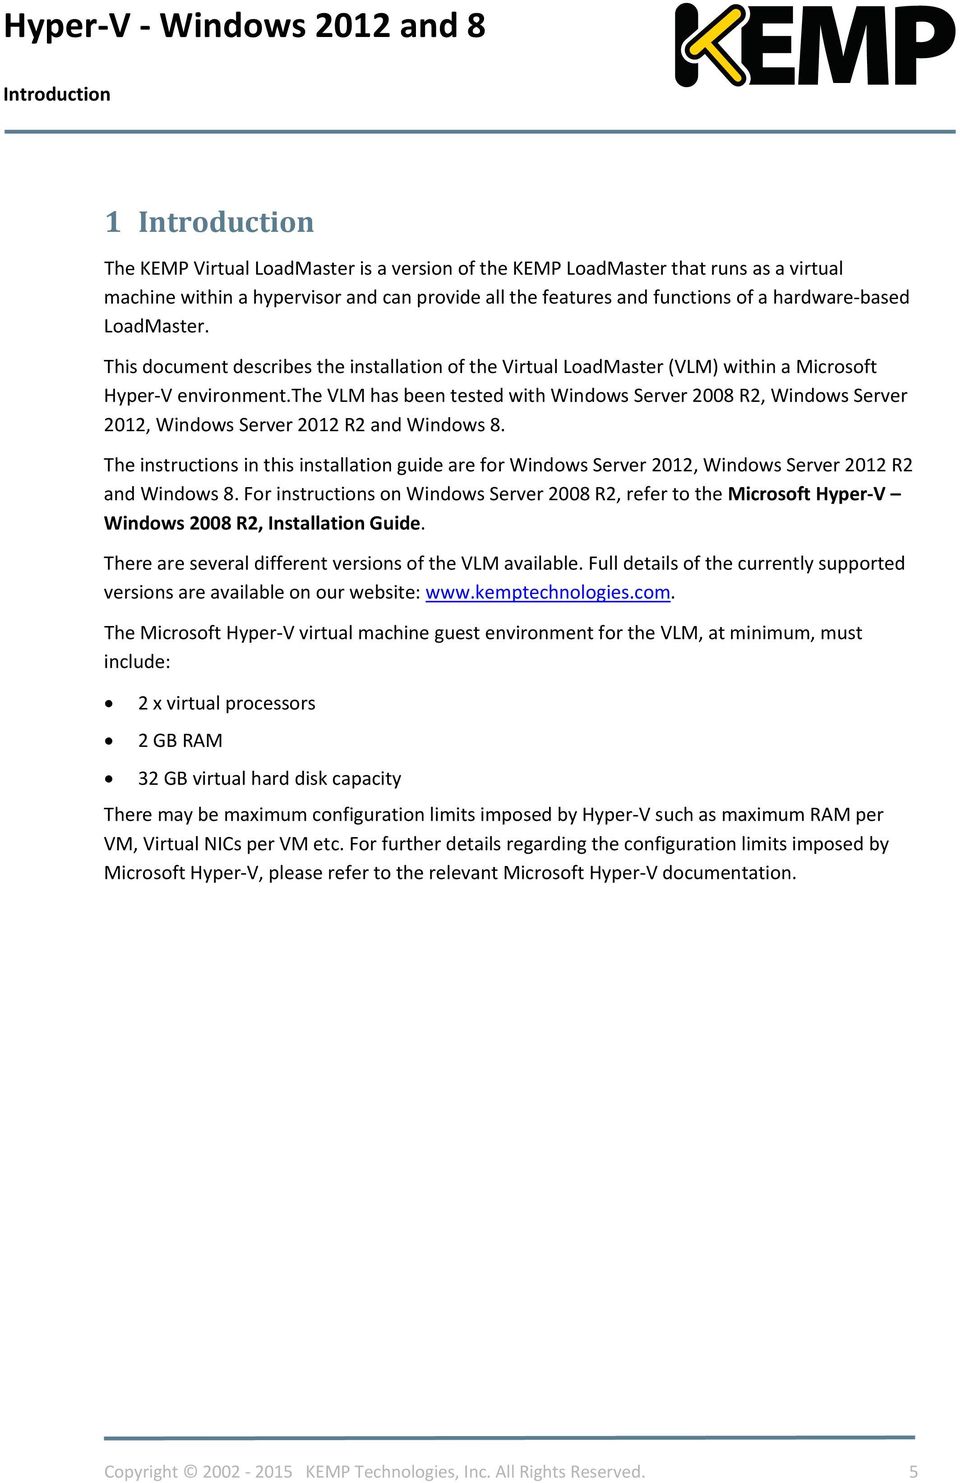 the VLM has been tested with Windows Server 2008 R2, Windows Server 2012, Windows Server 2012 R2 and Windows 8.